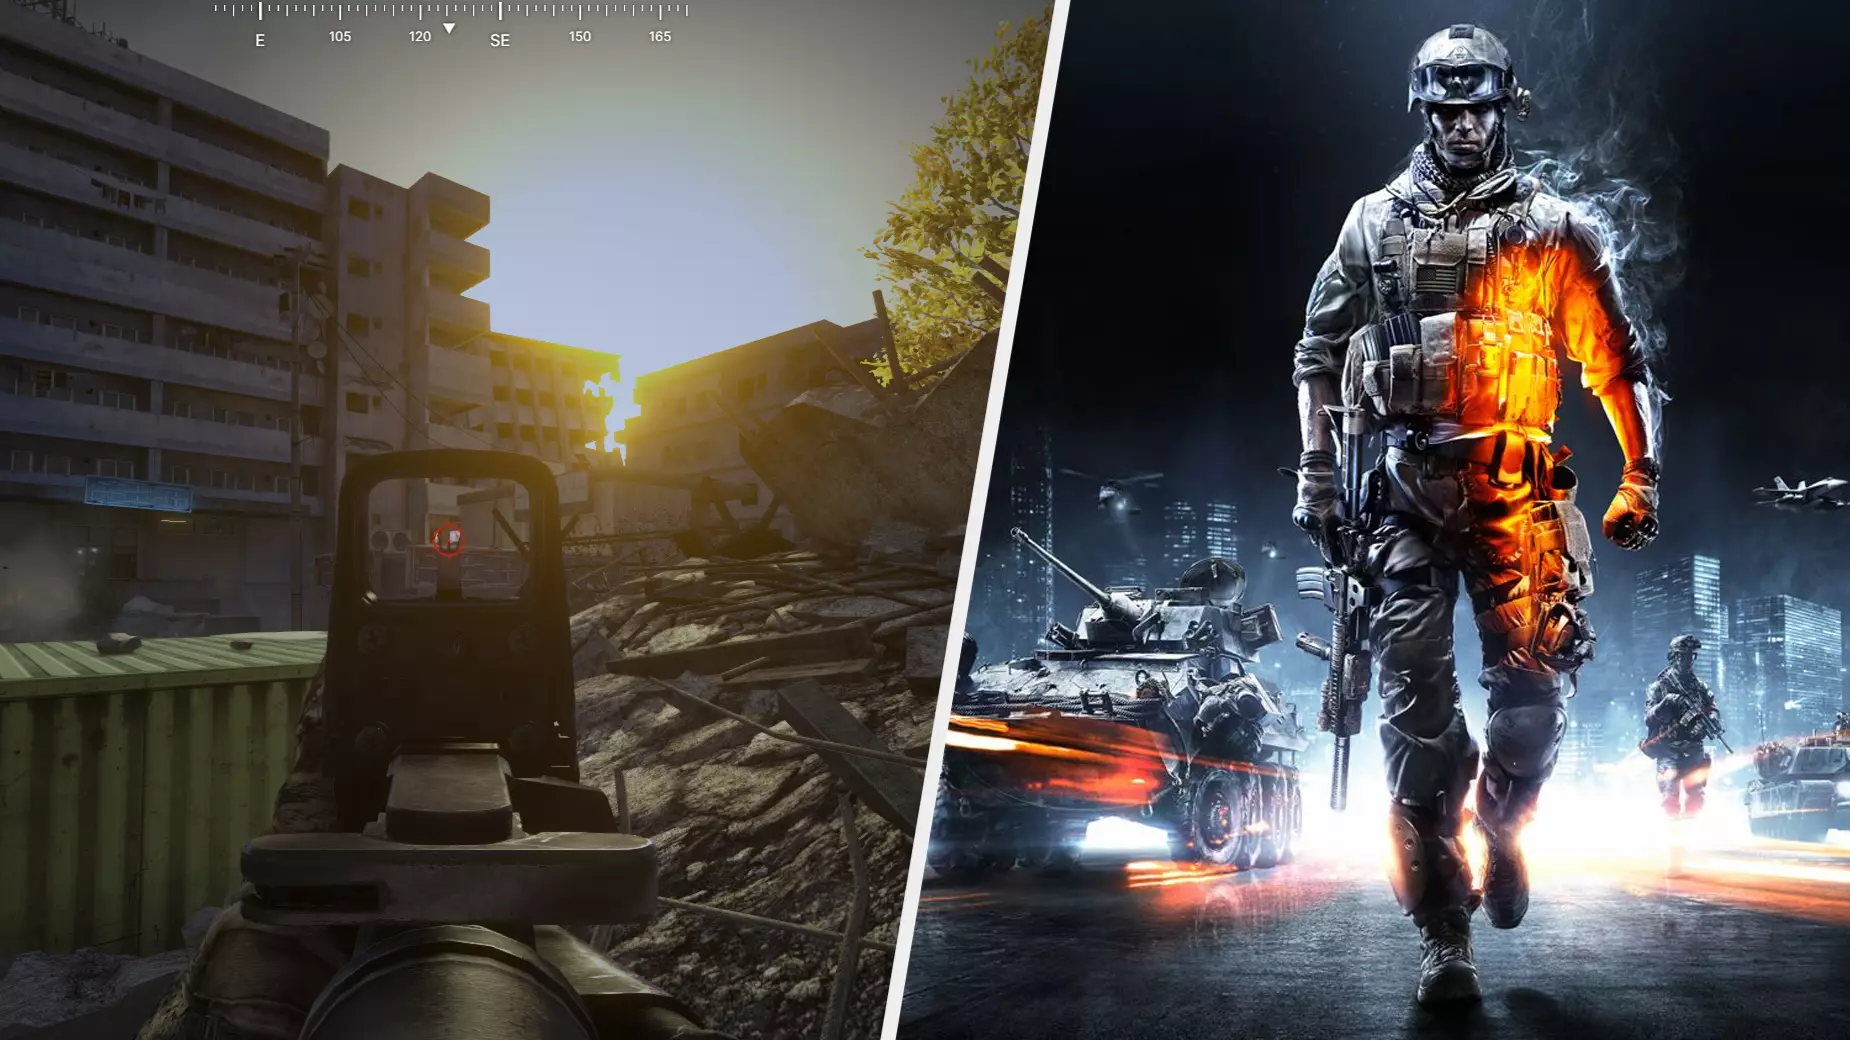 'Battlefield 3' Looks Stunning In This Realistic Tactical Overhaul